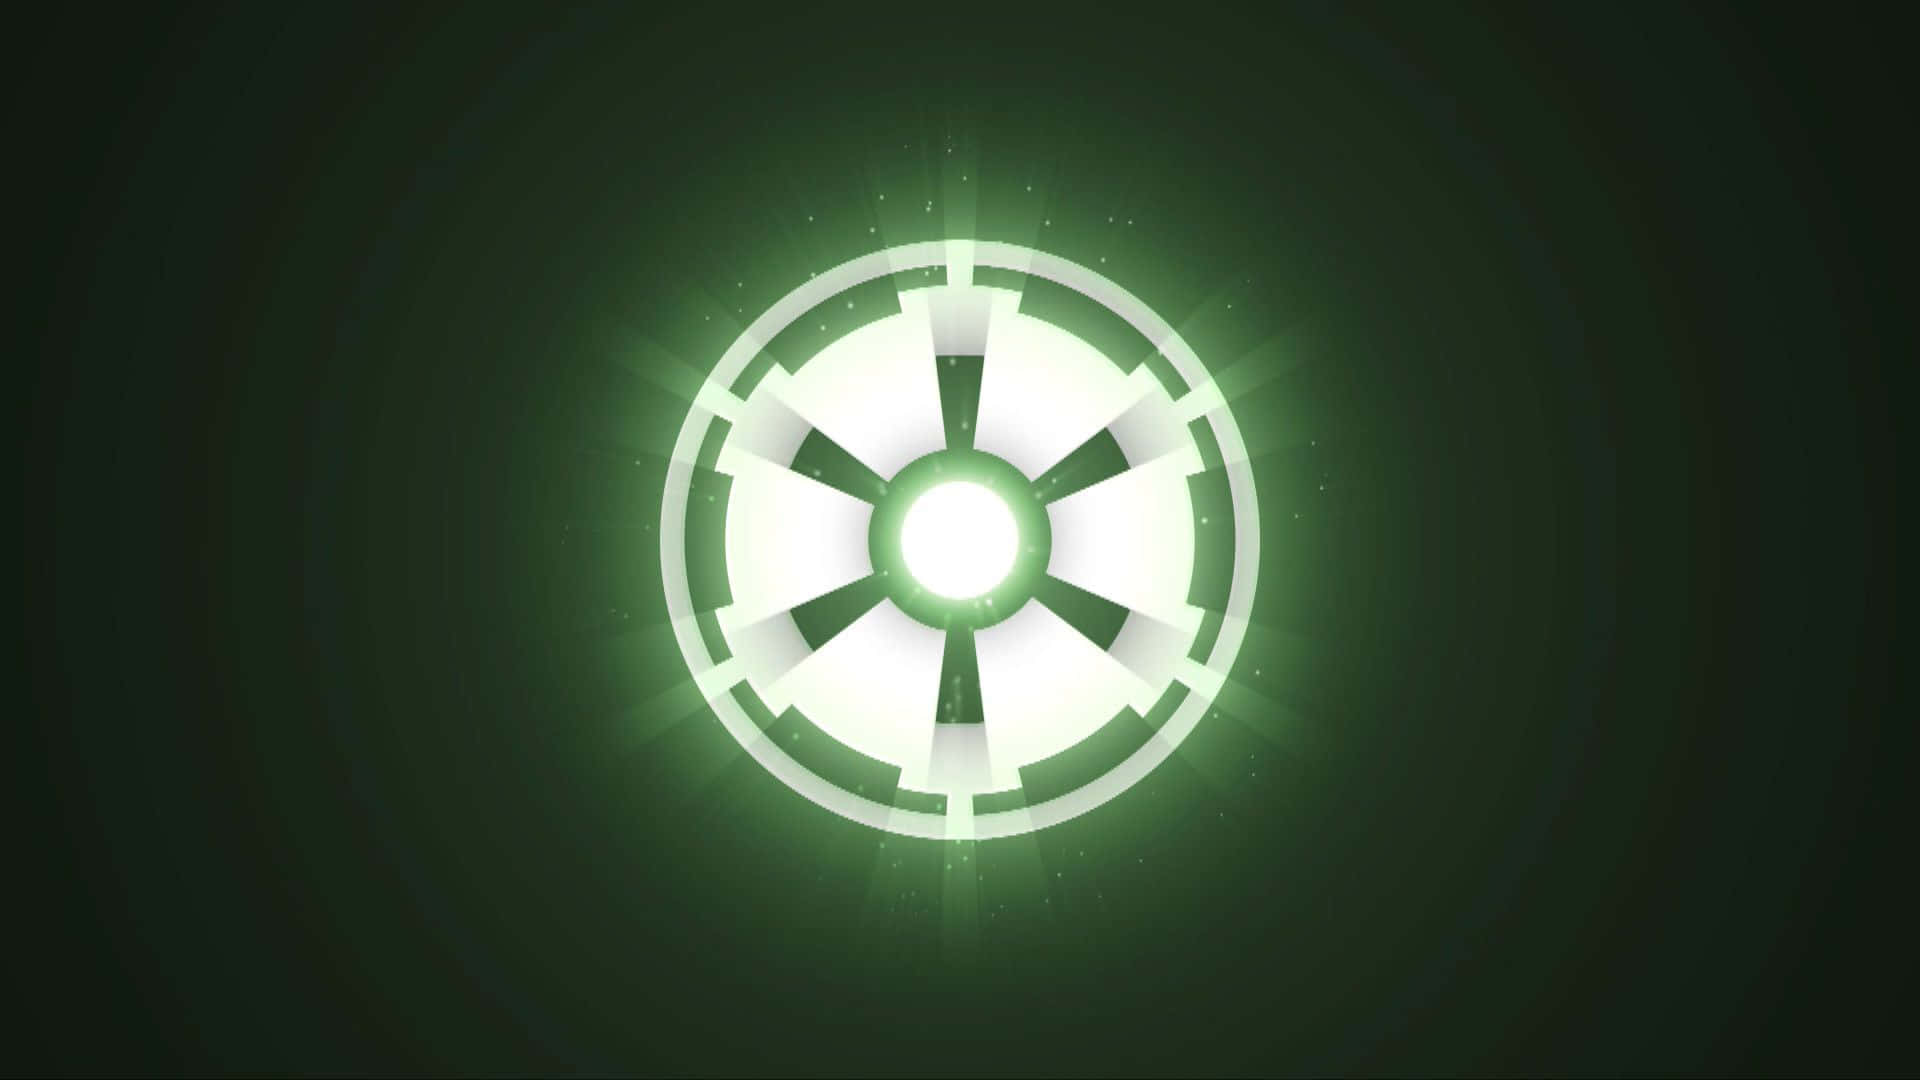 The Empire's Iconic Logo from the Star Wars Movies Wallpaper